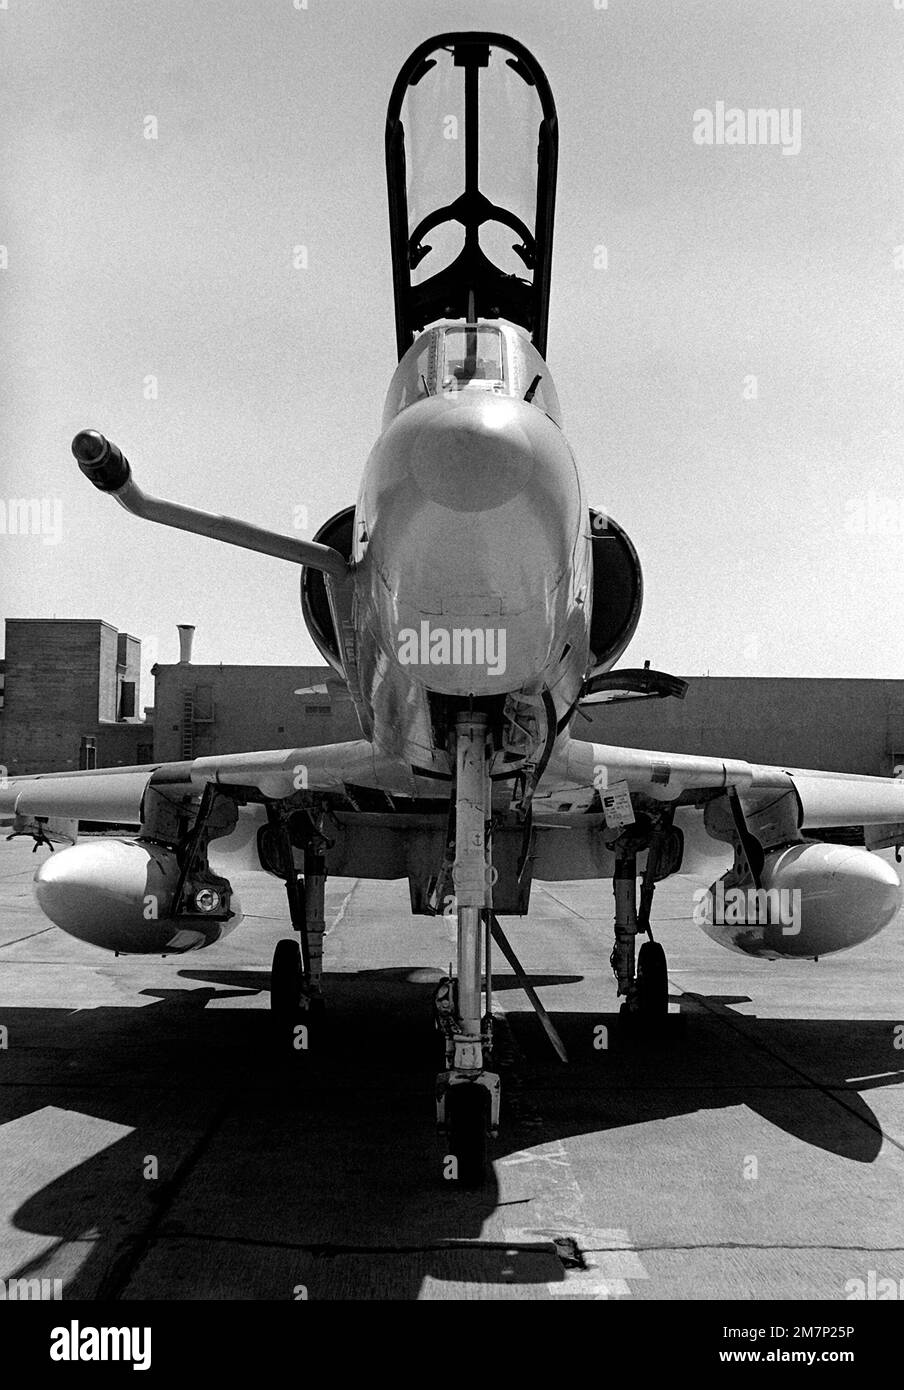 A low angle, front view of the last TA-4F Skyhawk aircraft received at this Marine Corps Air Station. The A-4 is a 'work horse' used by the infantry for many close air support missions. Base: Marine Corps Air Station El Toro State: California (CA) Country: United States Of America (USA) Stock Photo